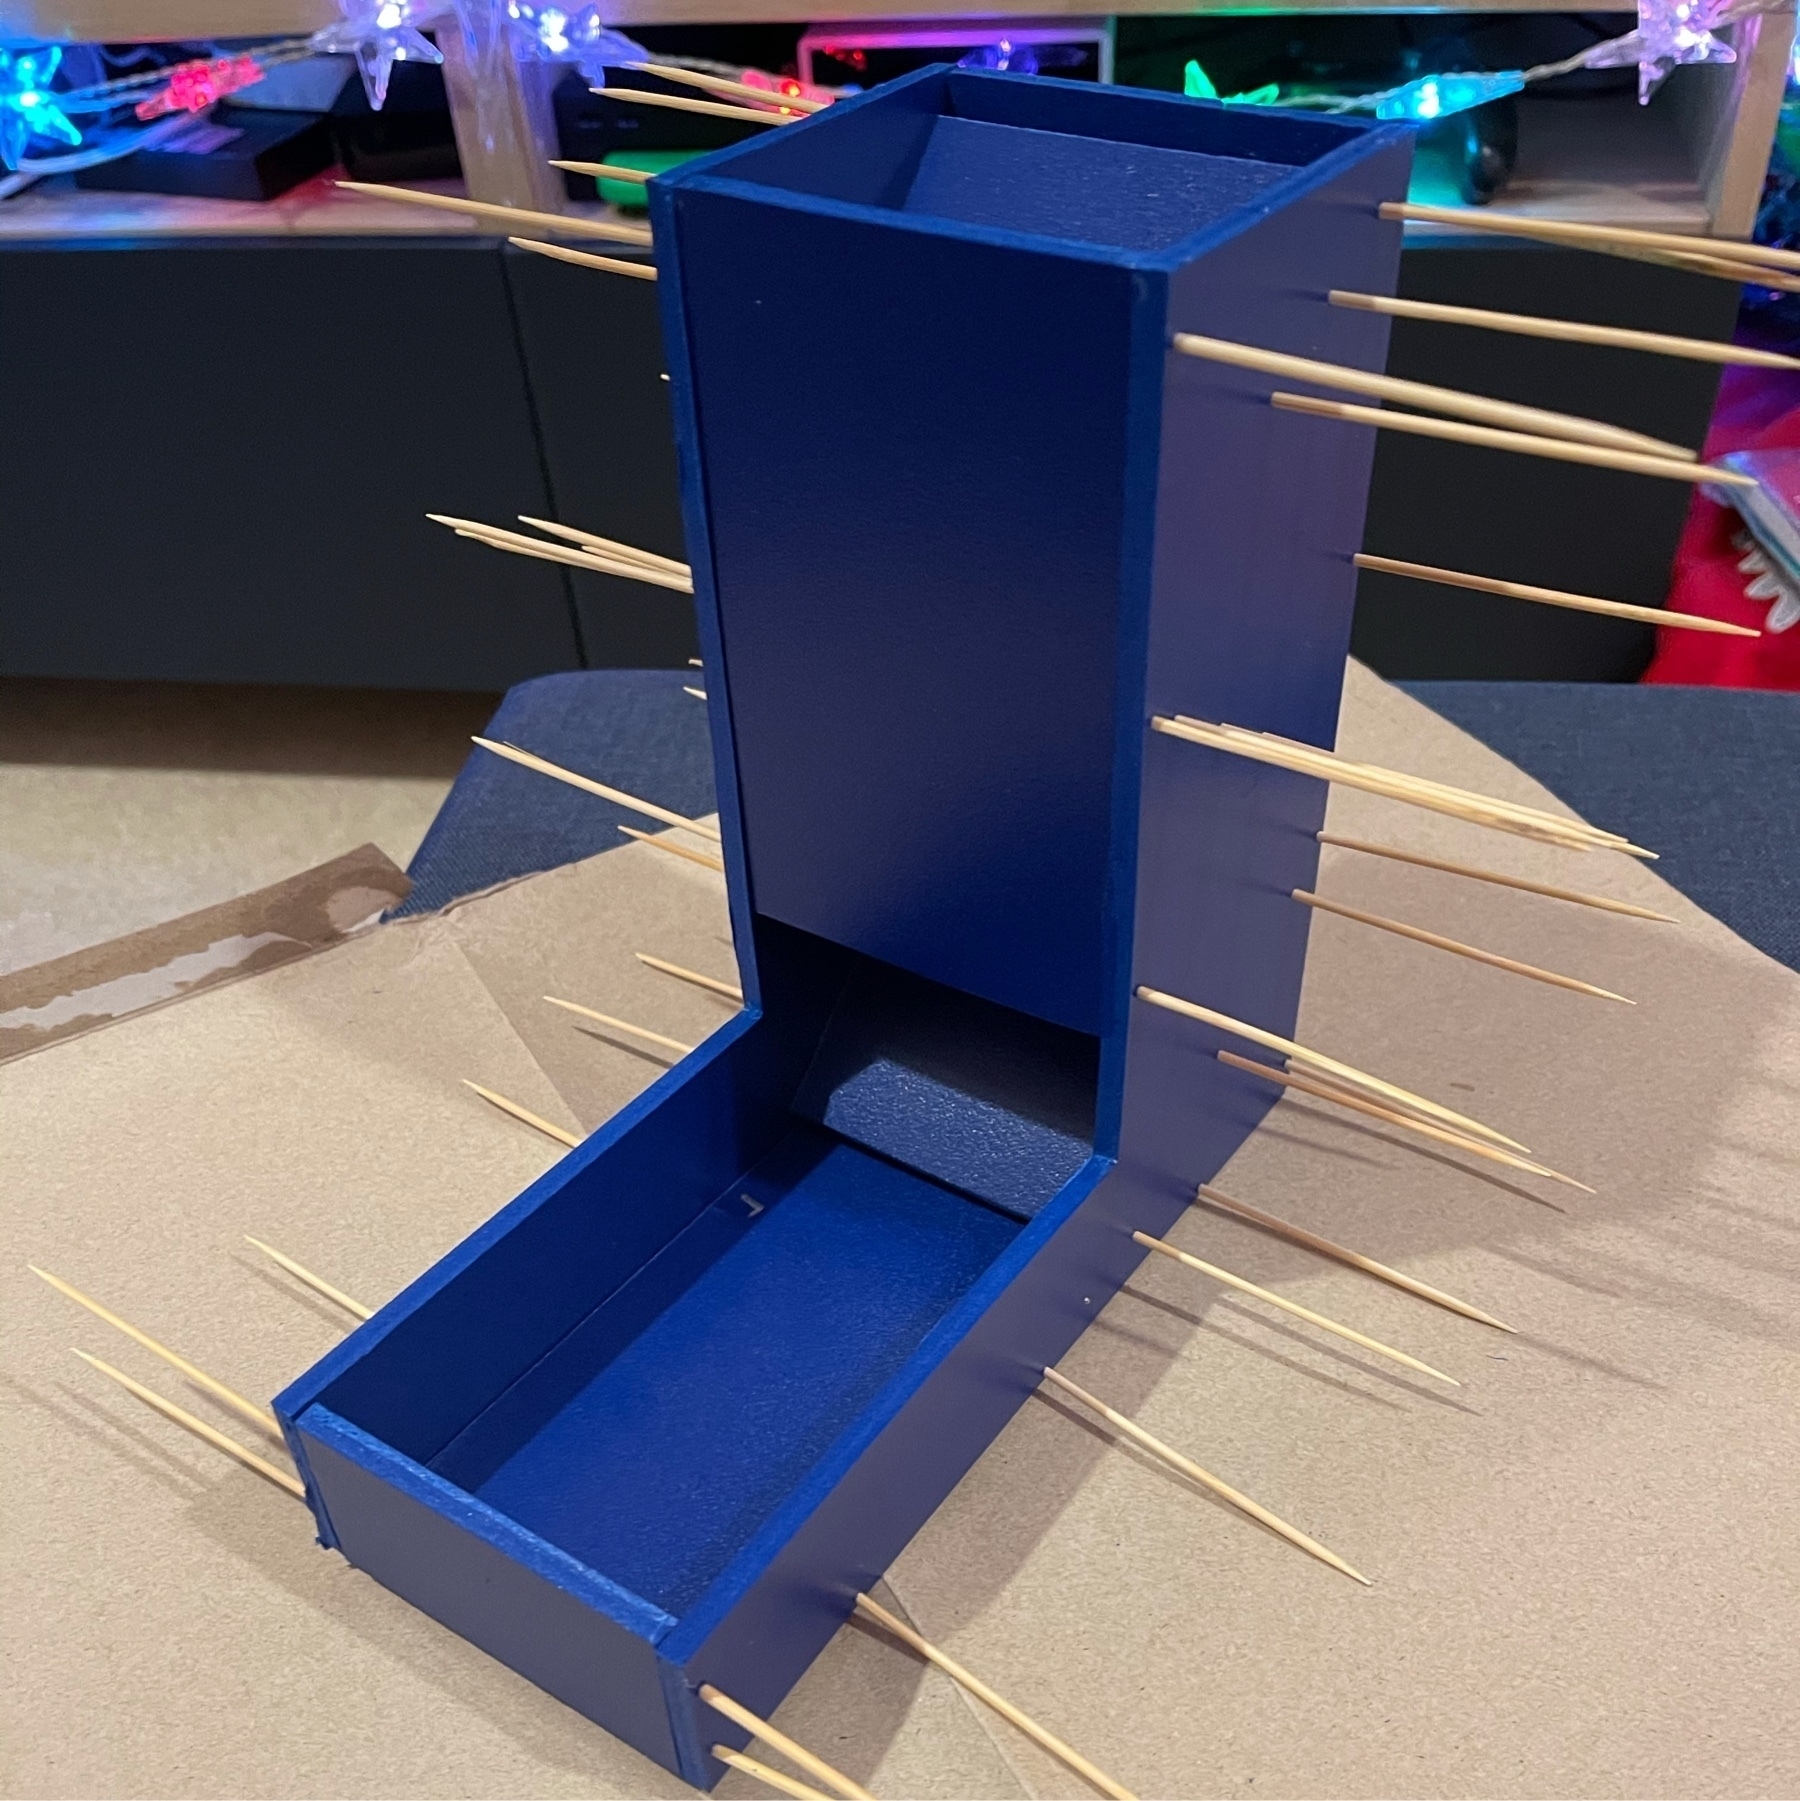 dice tower made of blue foamboard with toothpicks sticking out on the sides